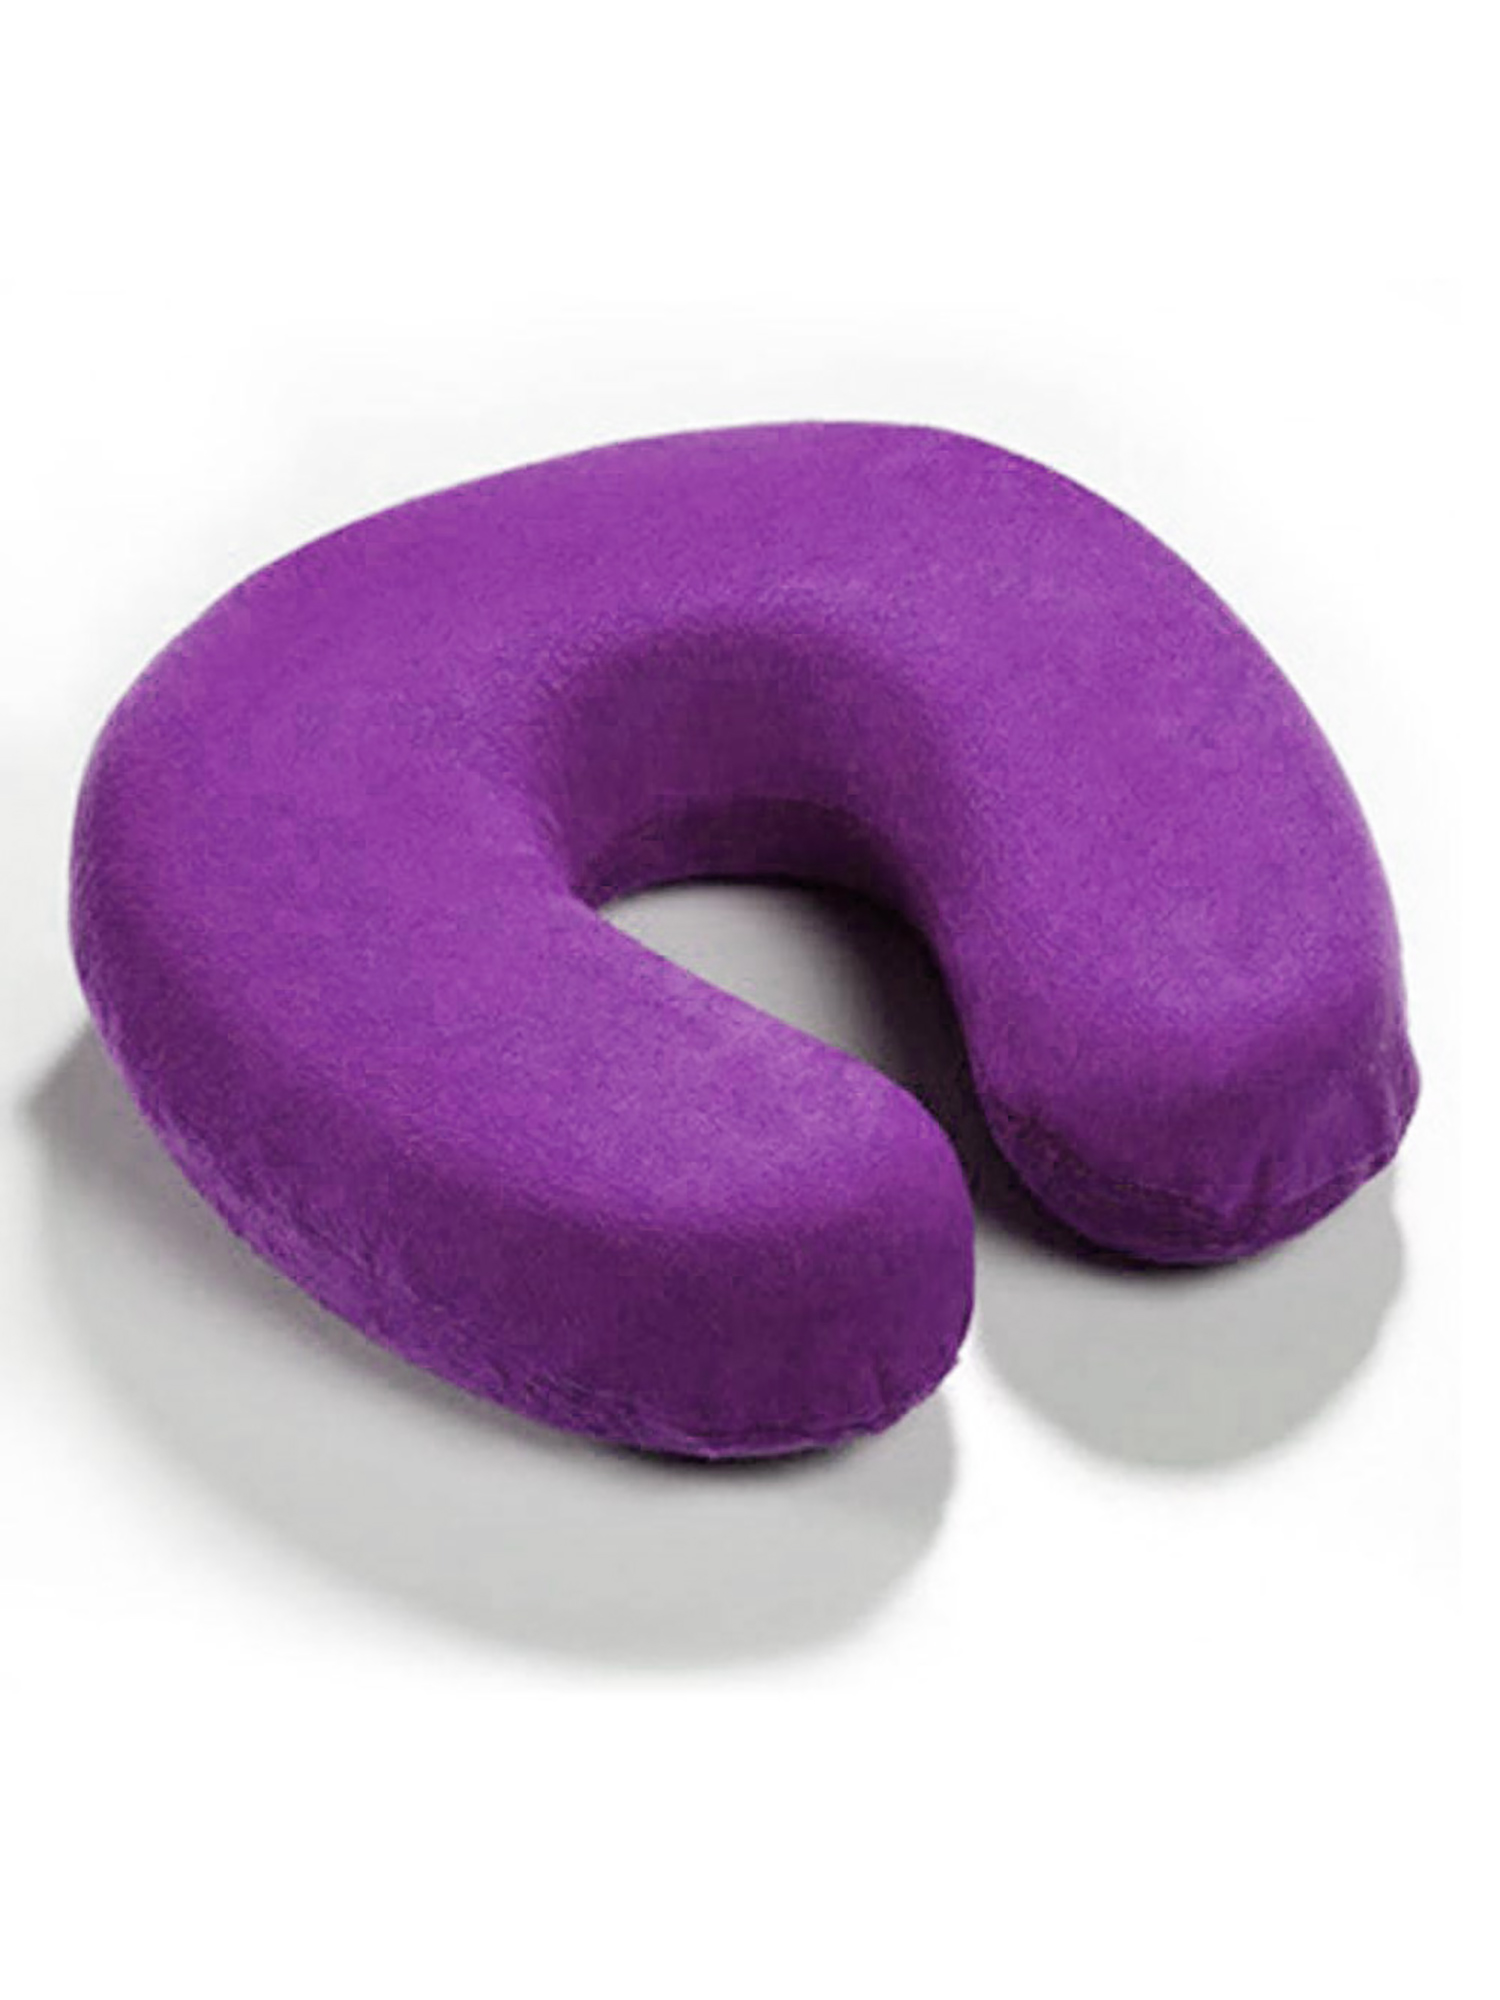 U Shape Memory Foam Neck Cushion Support Comfort Rest Outdoors Car Office Travel Pillow - Purple - image 4 of 4